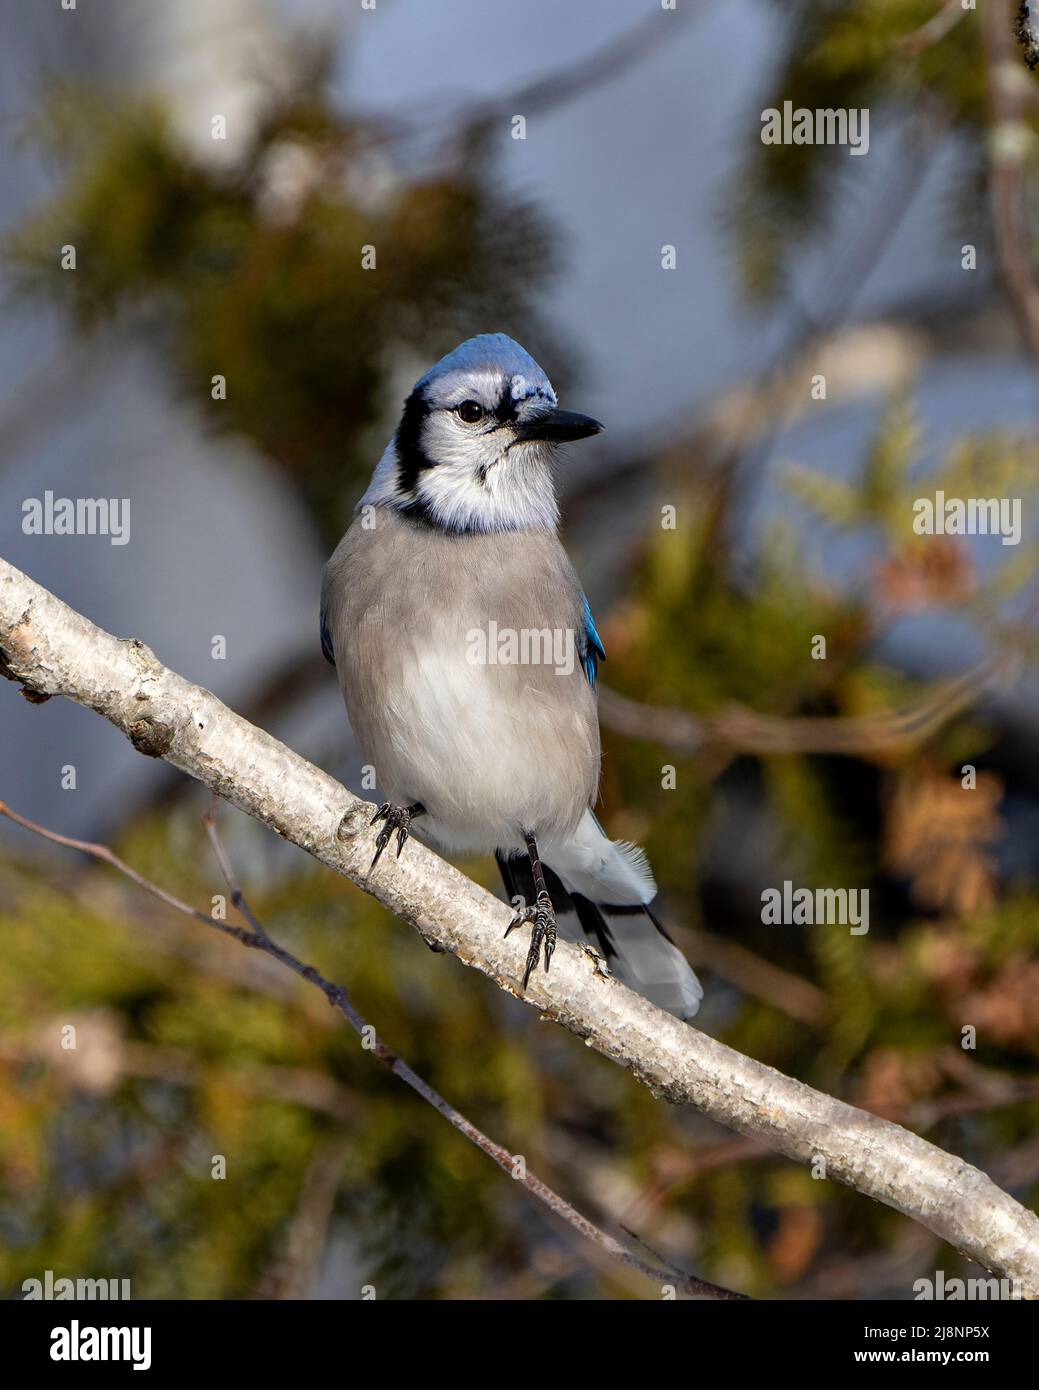 Blue Jay bird perched on a branch with a blur background in its environment and habitat surrounding displaying blue feather plumage. Stock Photo